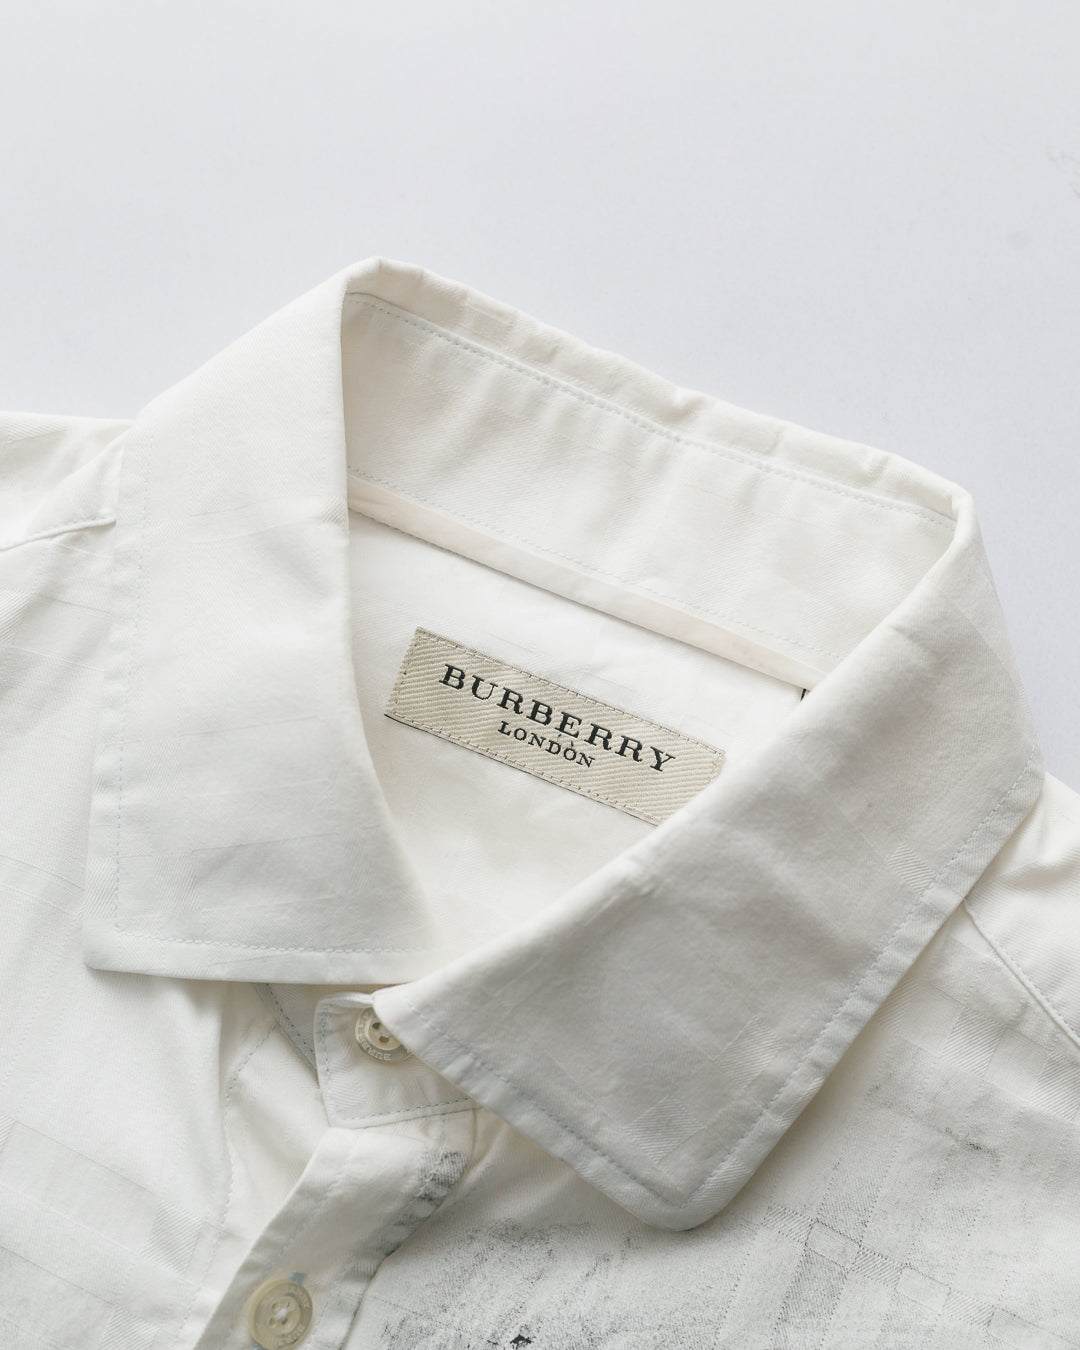 Handpainted Burberry Self Patterned Button Down